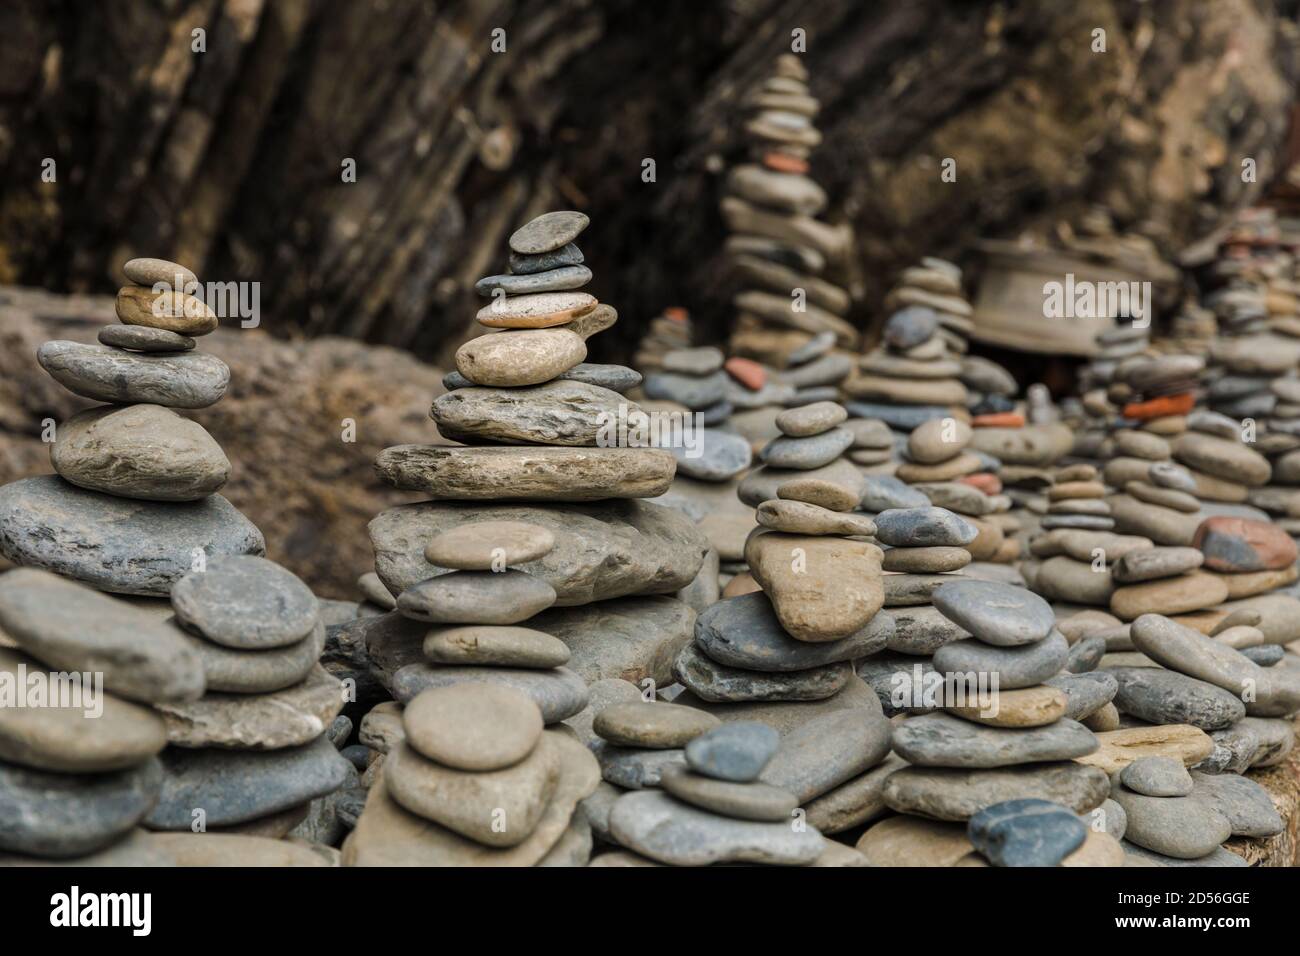 Beautiful close-up view of several stacked stones in a row on an outcropping rock at the entrance of the rugged pebble beach on the east coast of... Stock Photo